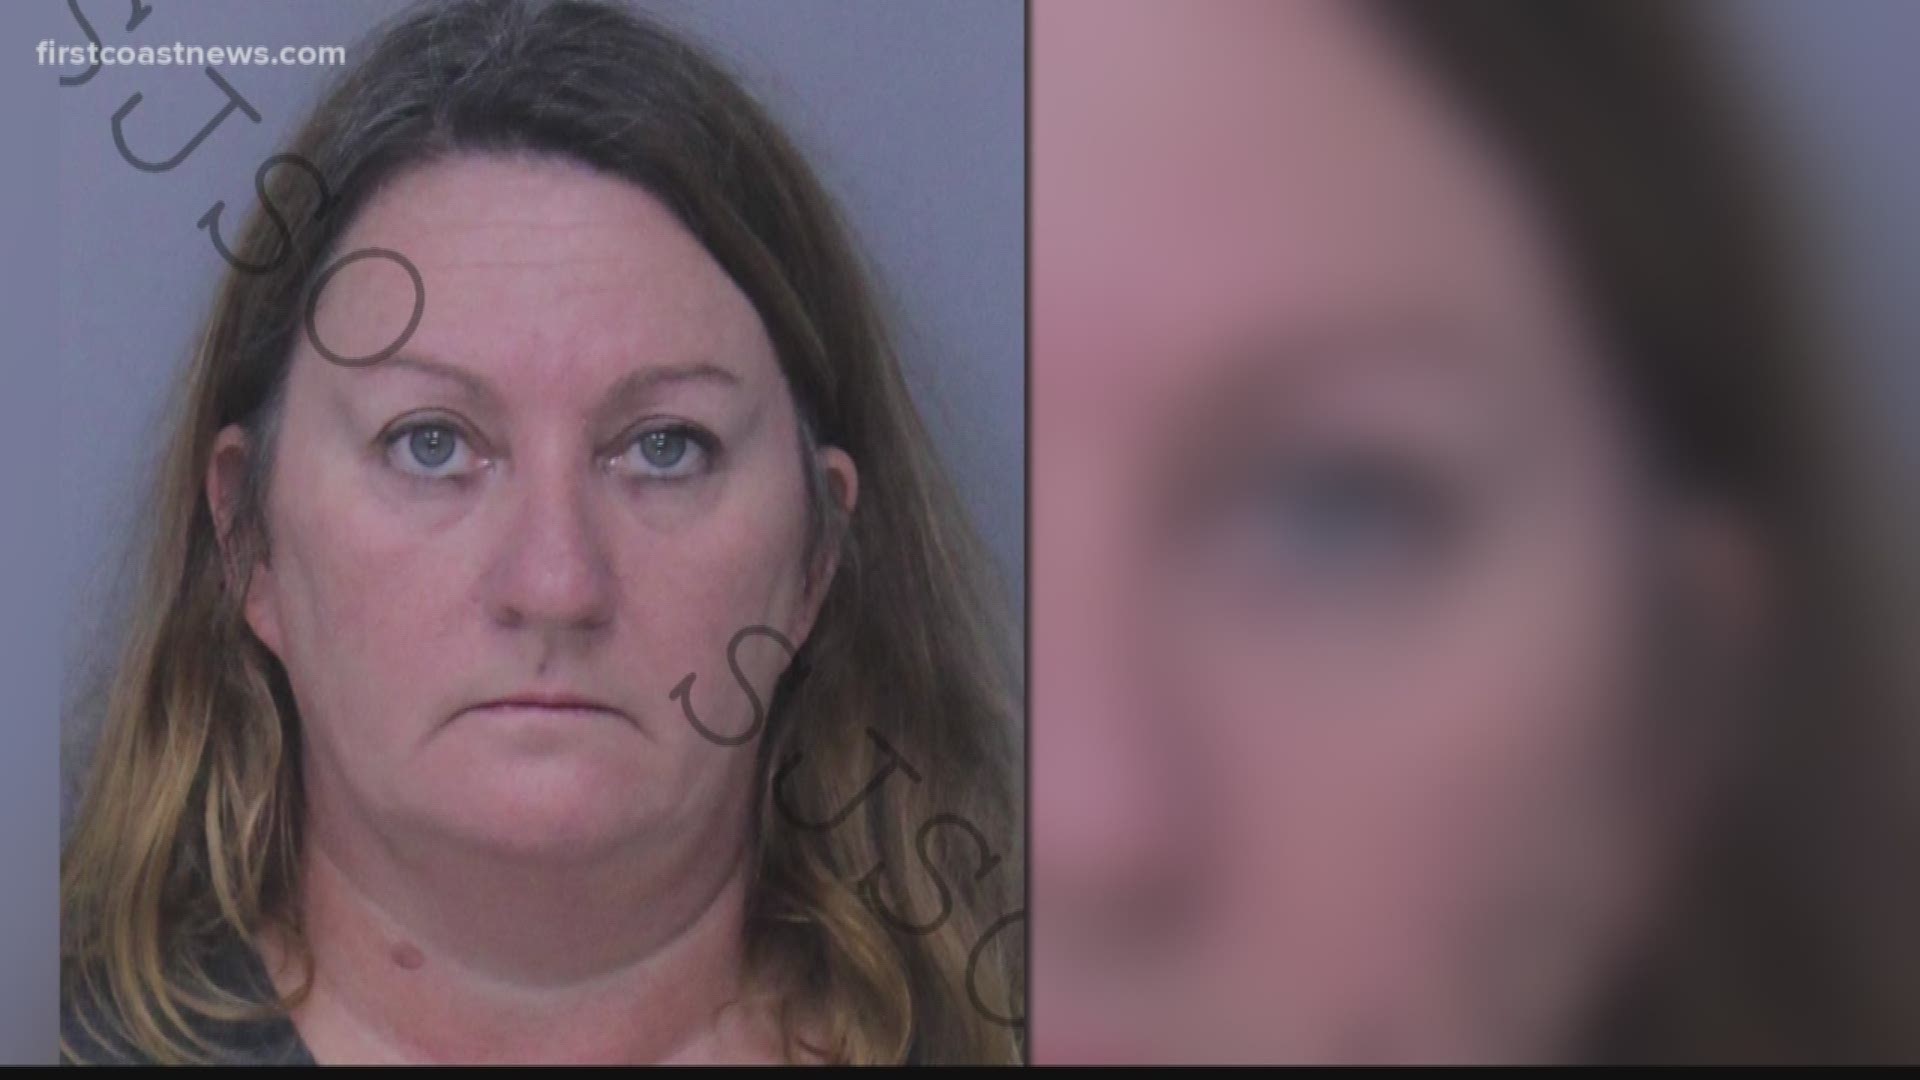 The woman accused of driving while drunk in a crash that killed a Jacksonville Sheriff's Office employee bonded out of jail Monday, according to the St. Johns County Sheriff's Office.